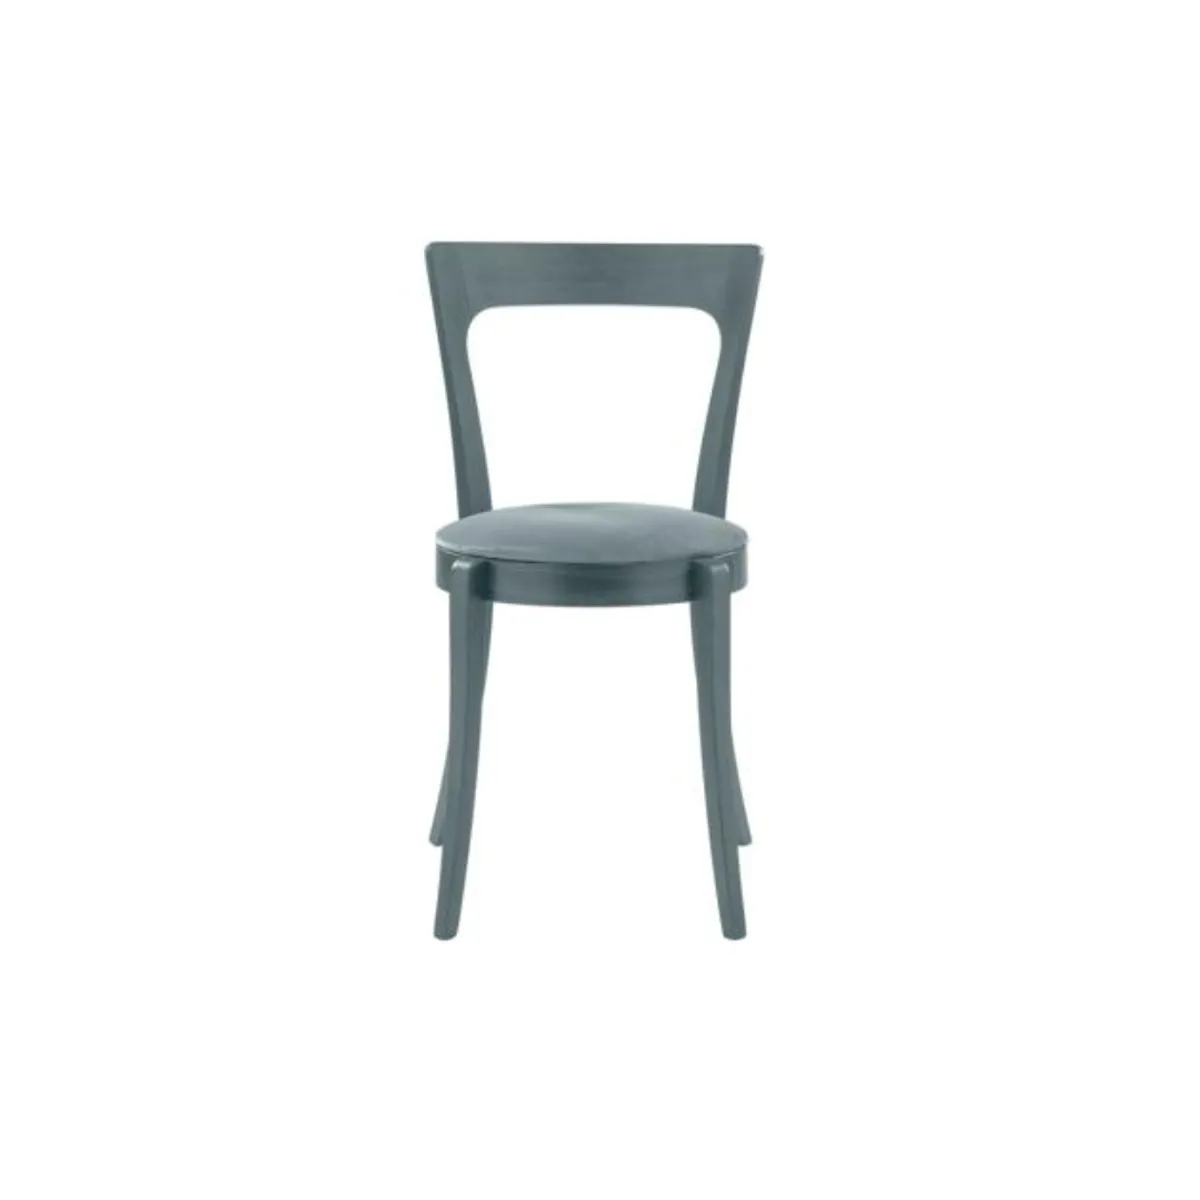 Elodie soft side chair 2